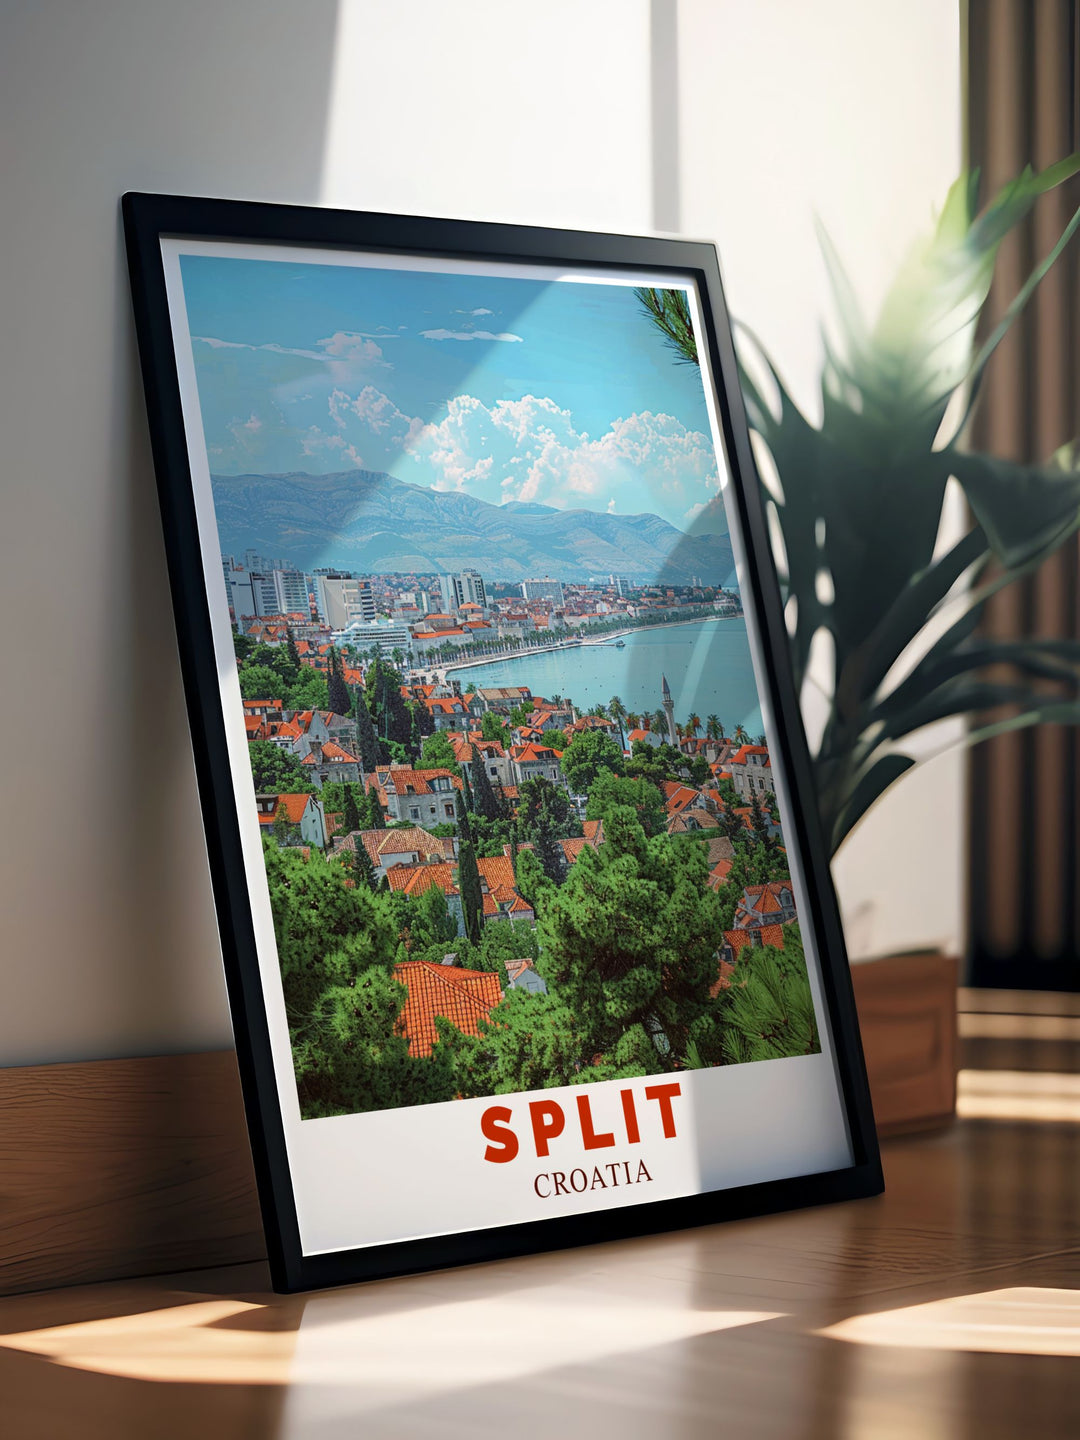 Featuring the majestic Marjan Hill, this poster celebrates the unique blend of history and natural beauty in Split, inviting viewers to explore the citys iconic sites and tranquil nature.